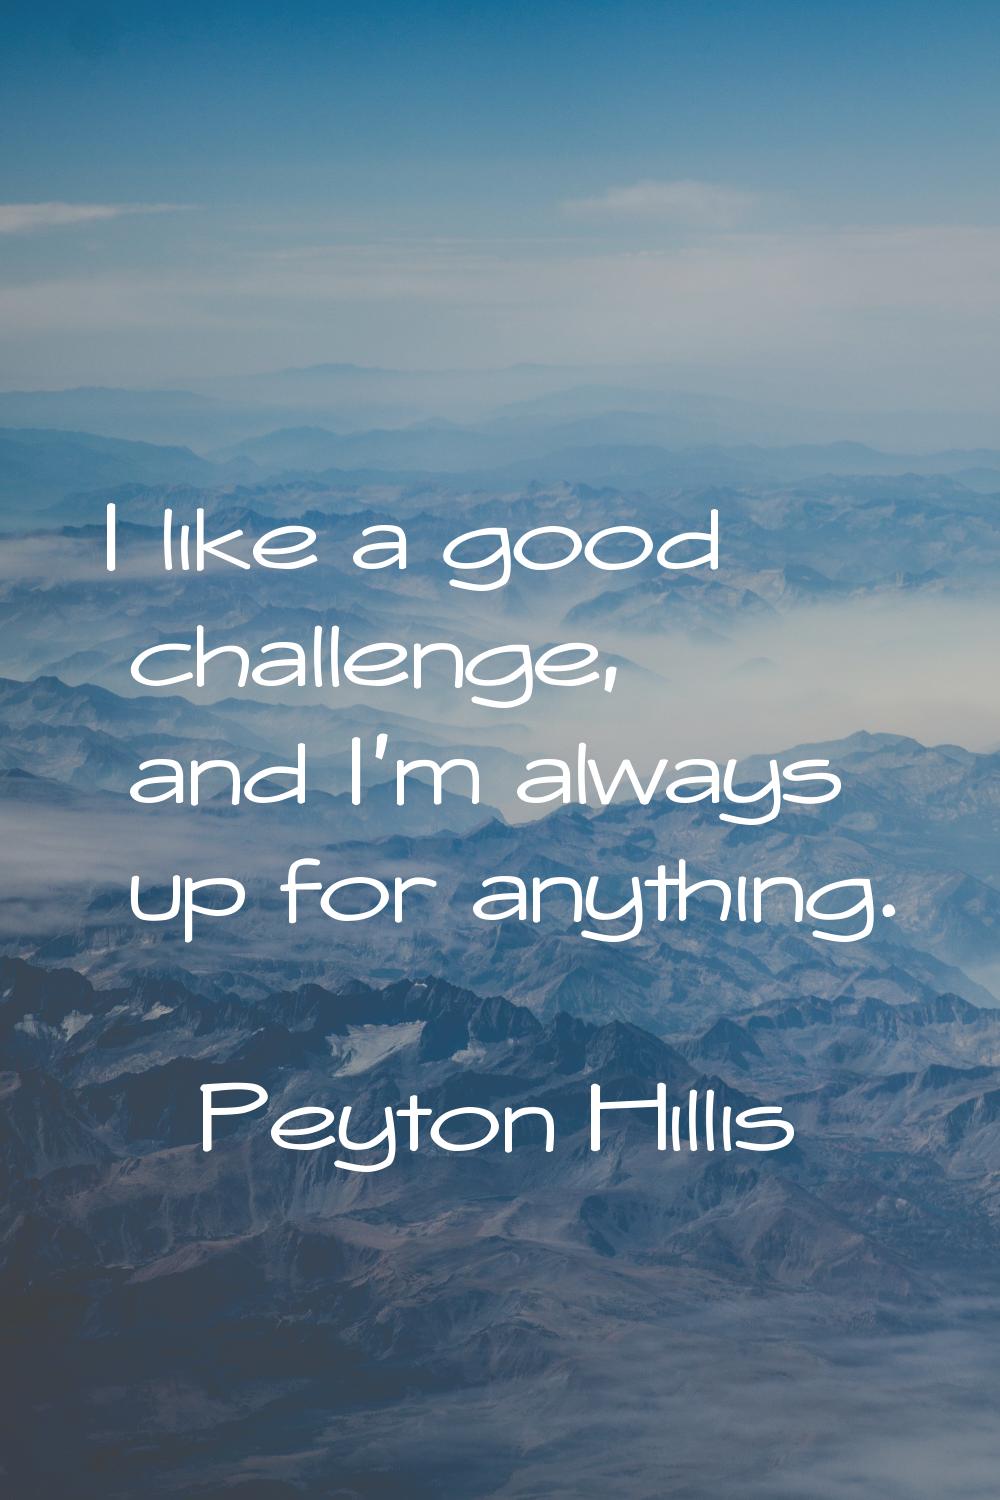 I like a good challenge, and I'm always up for anything.